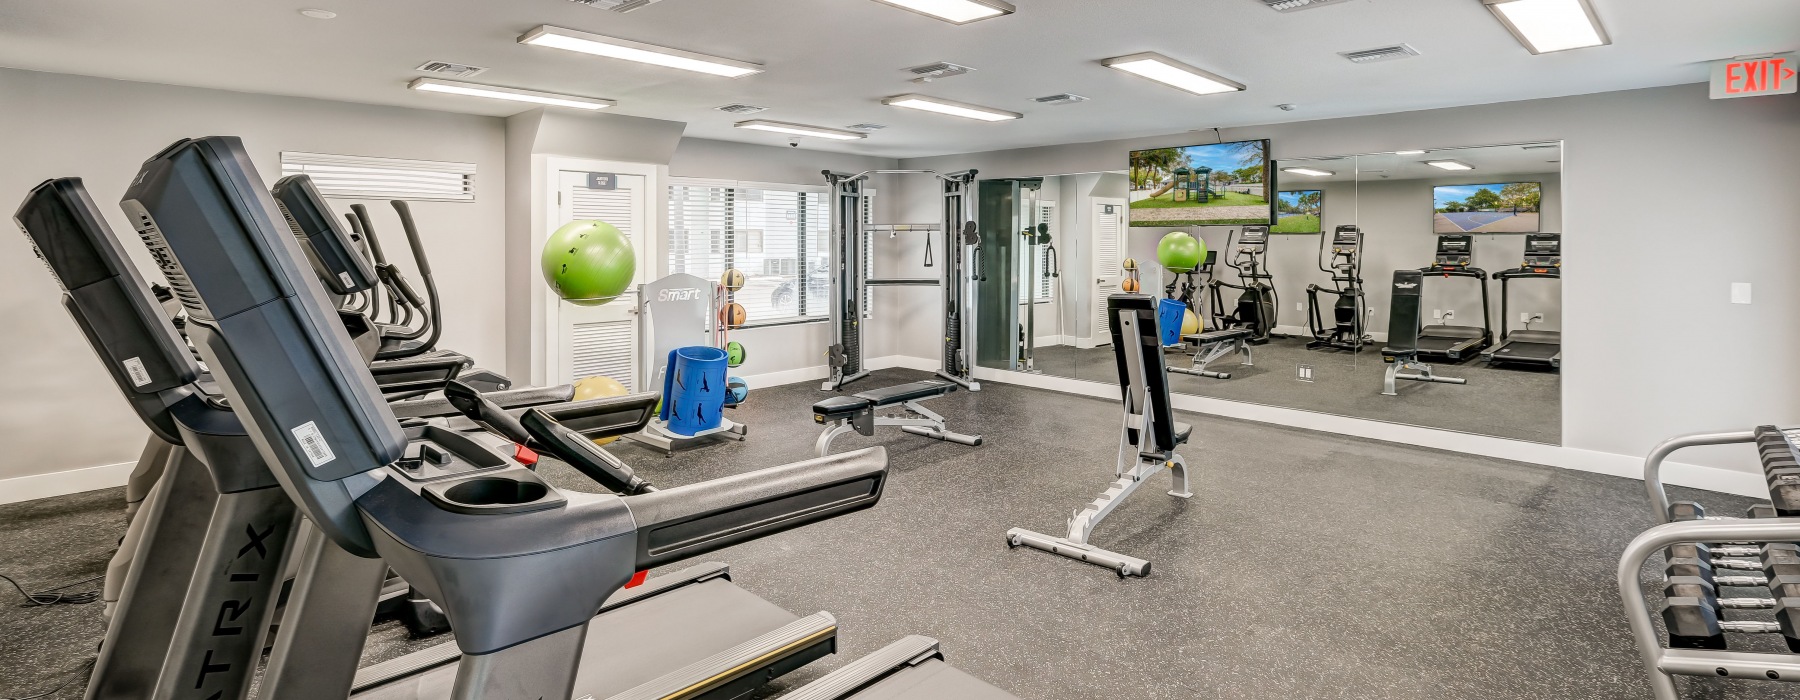 Fitness center with treadmills and weight benches